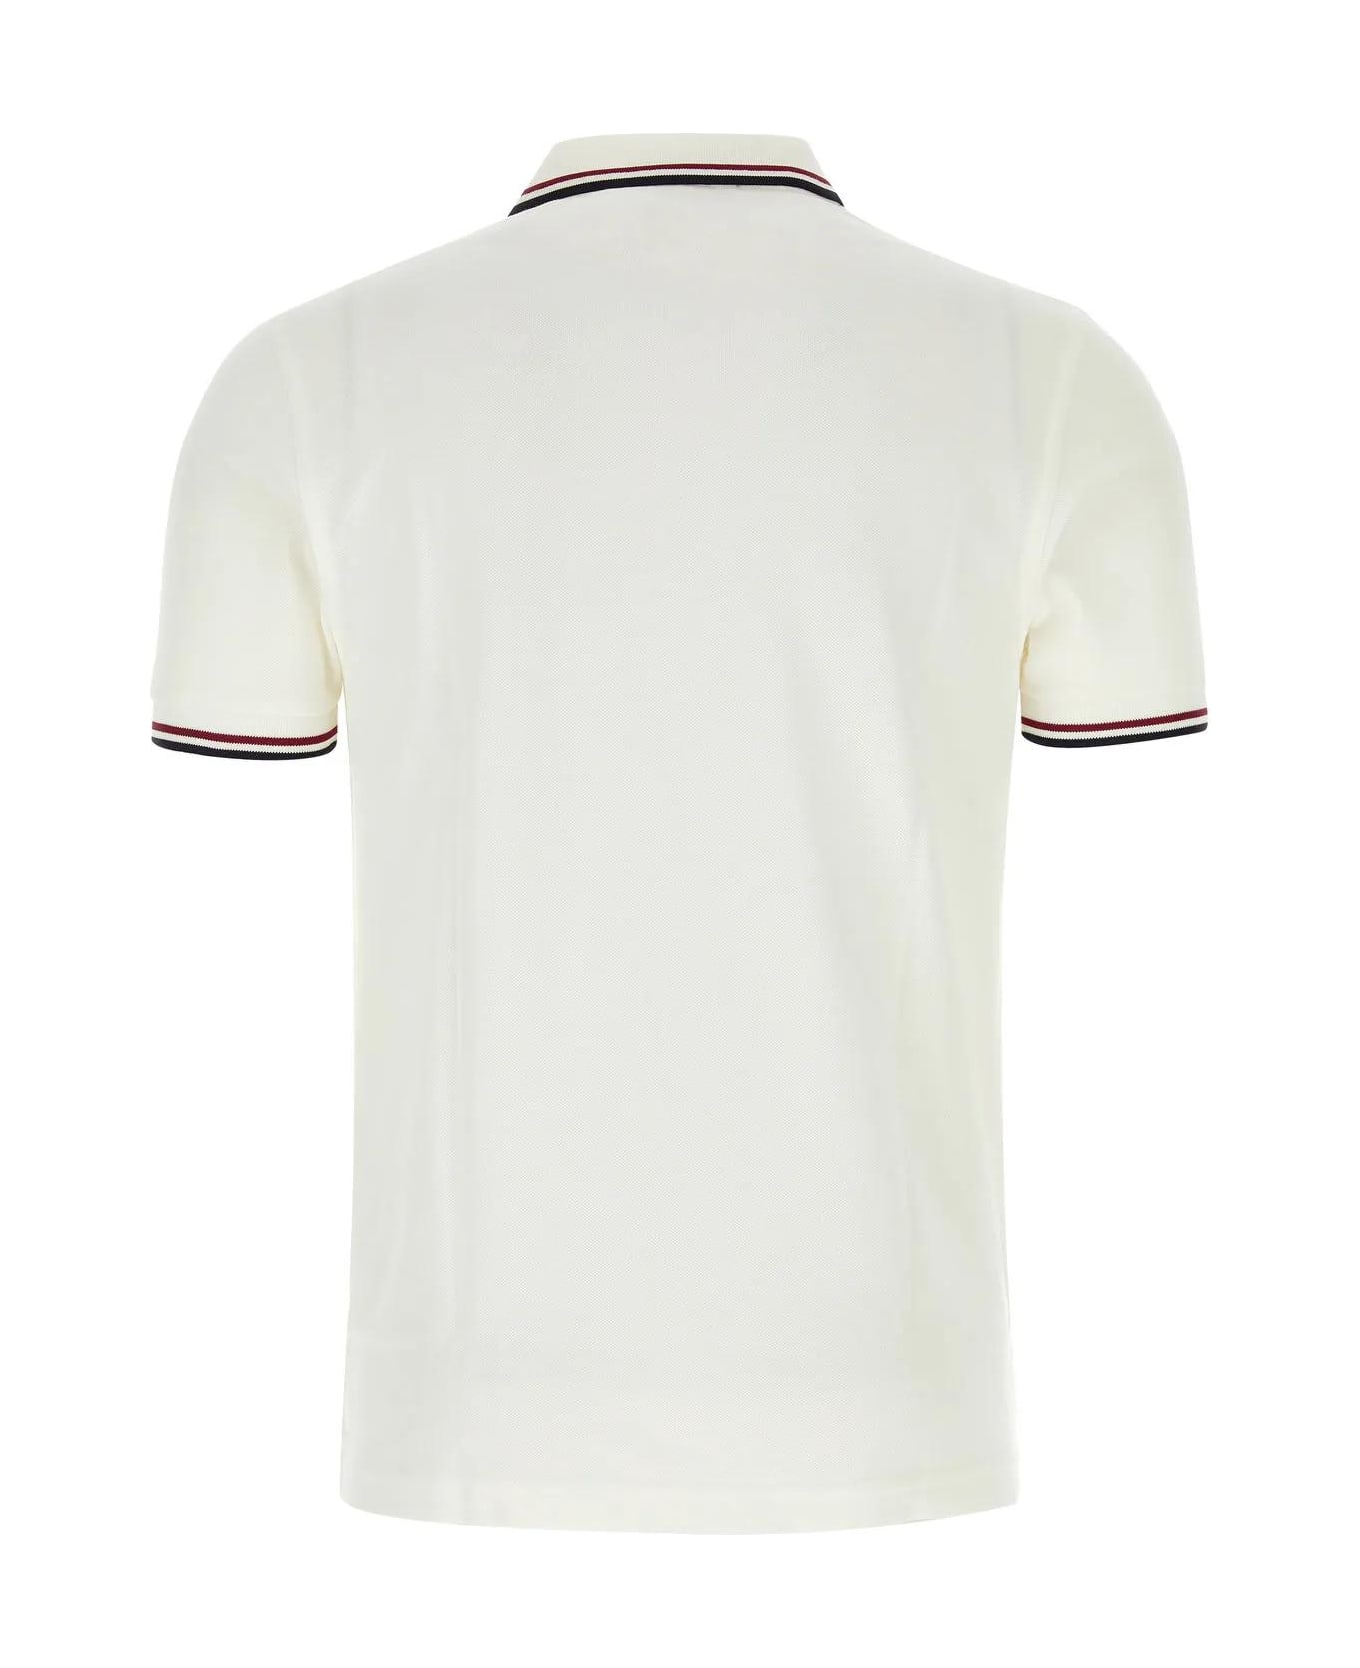 Fred Perry White Piquet Polo Shirt - Snwht/bred/nvy